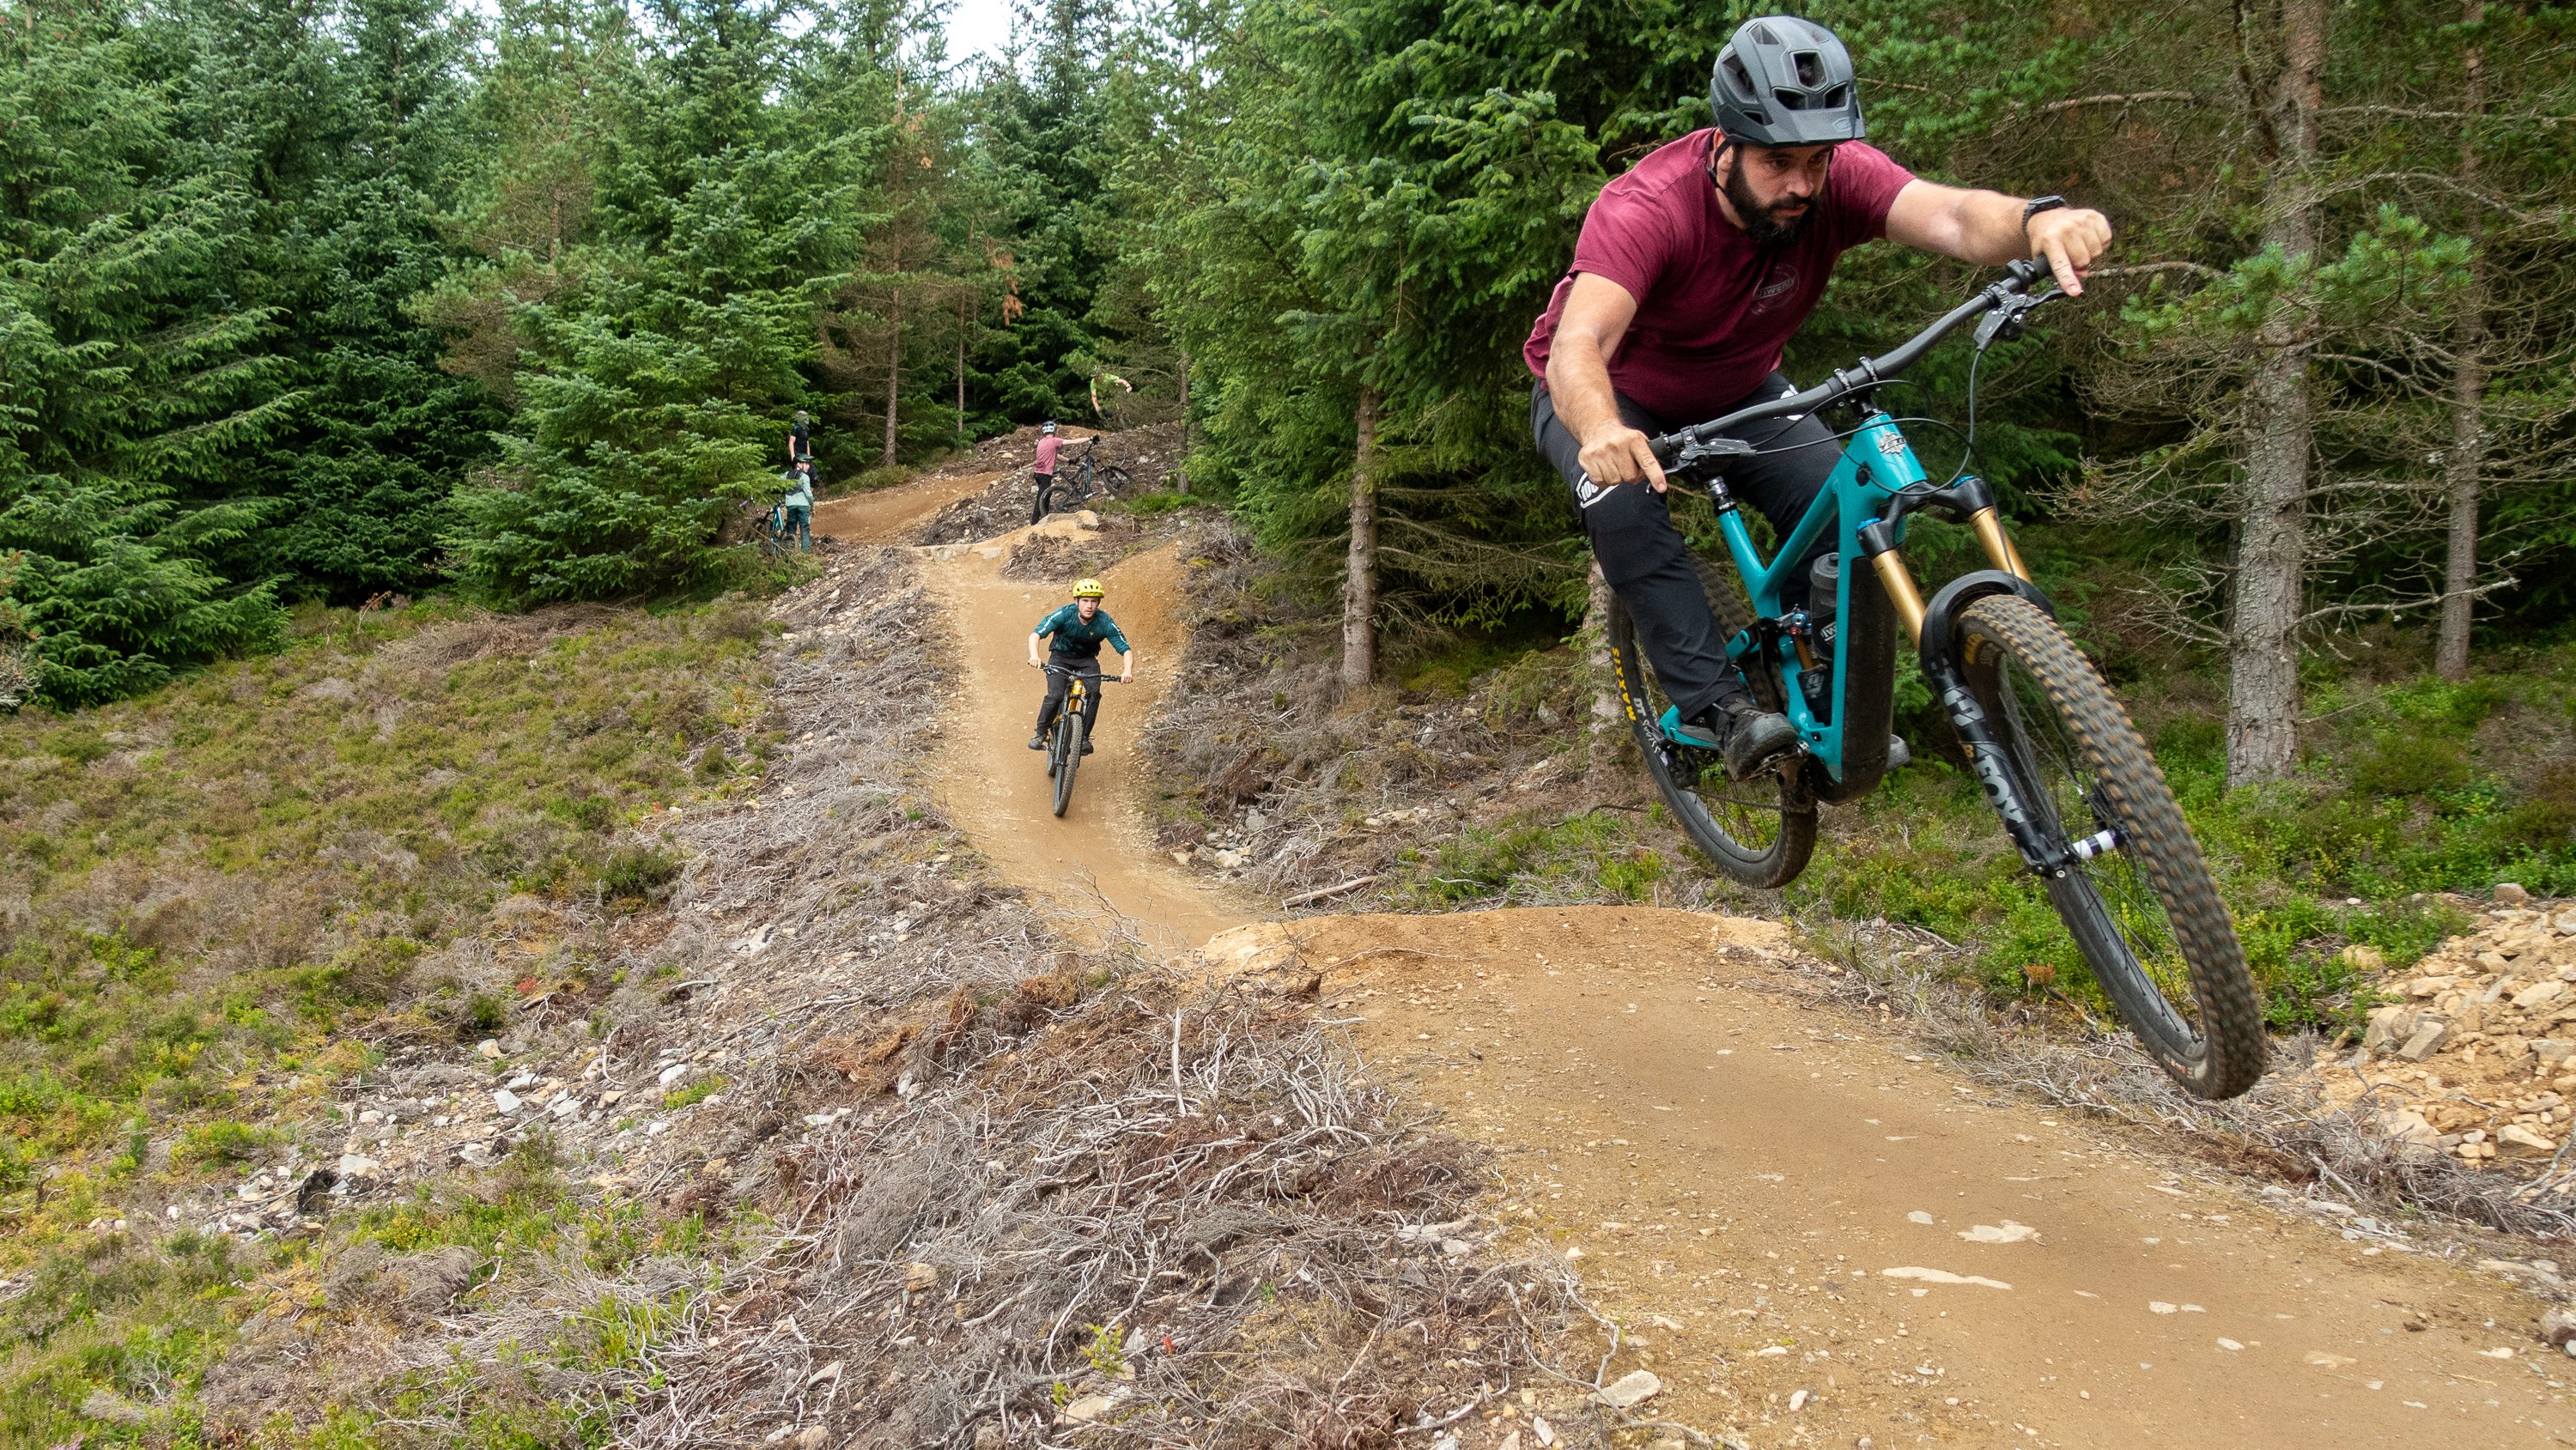 Lewis demo riding a Yeti 160e at Tarland Trails Pittendereich